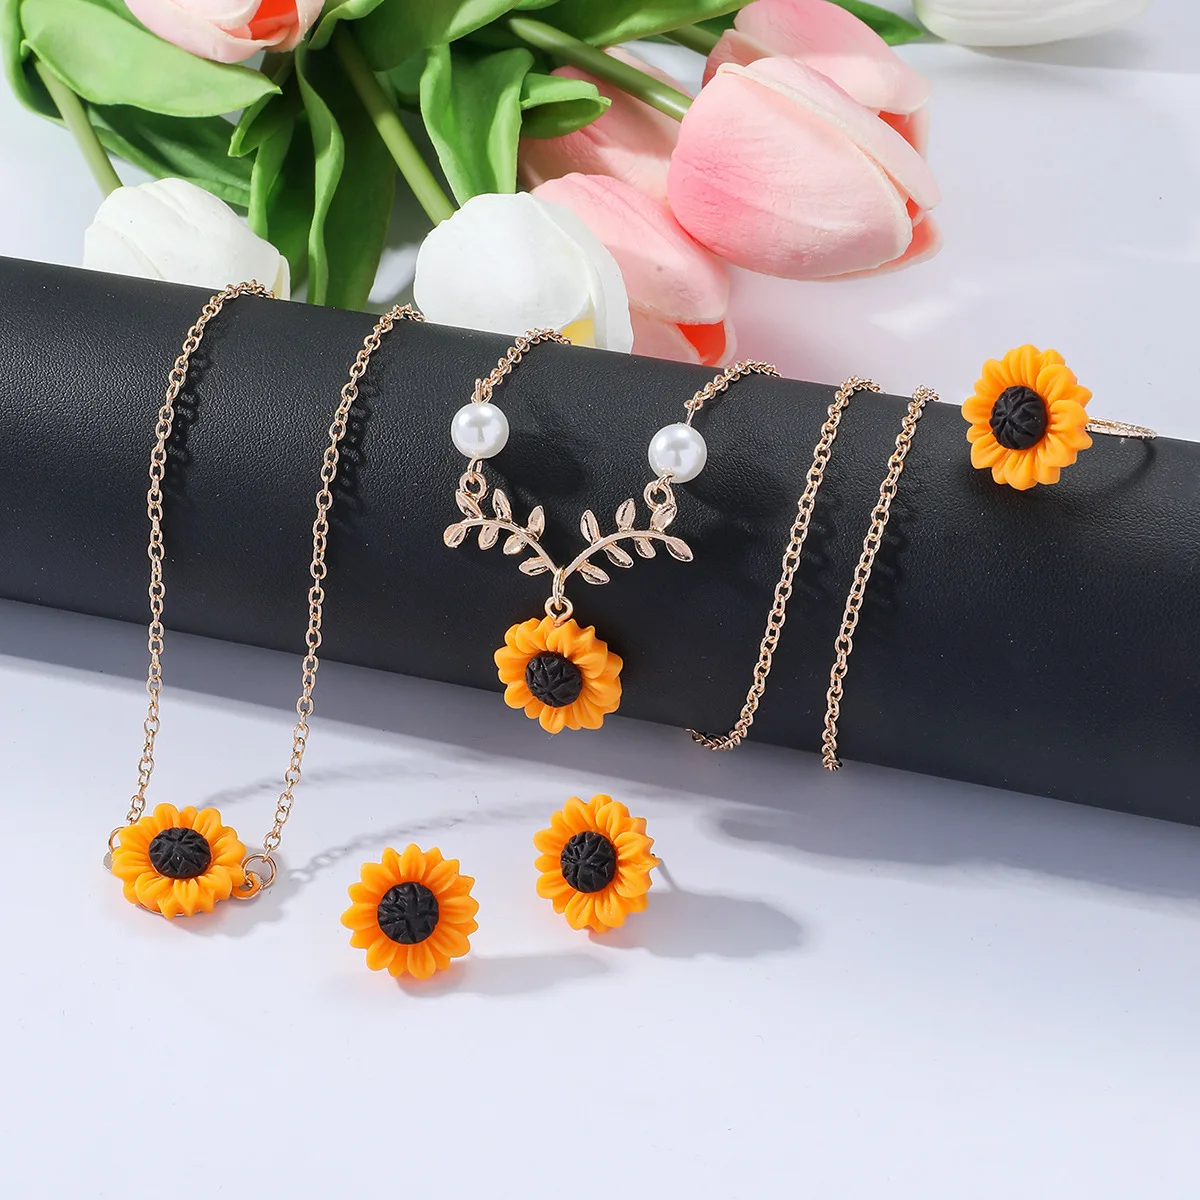 

hot selling creative sunflower necklace earrings ring flower bracelet four-piece jewelry set manufacturers fine luxury necklaces